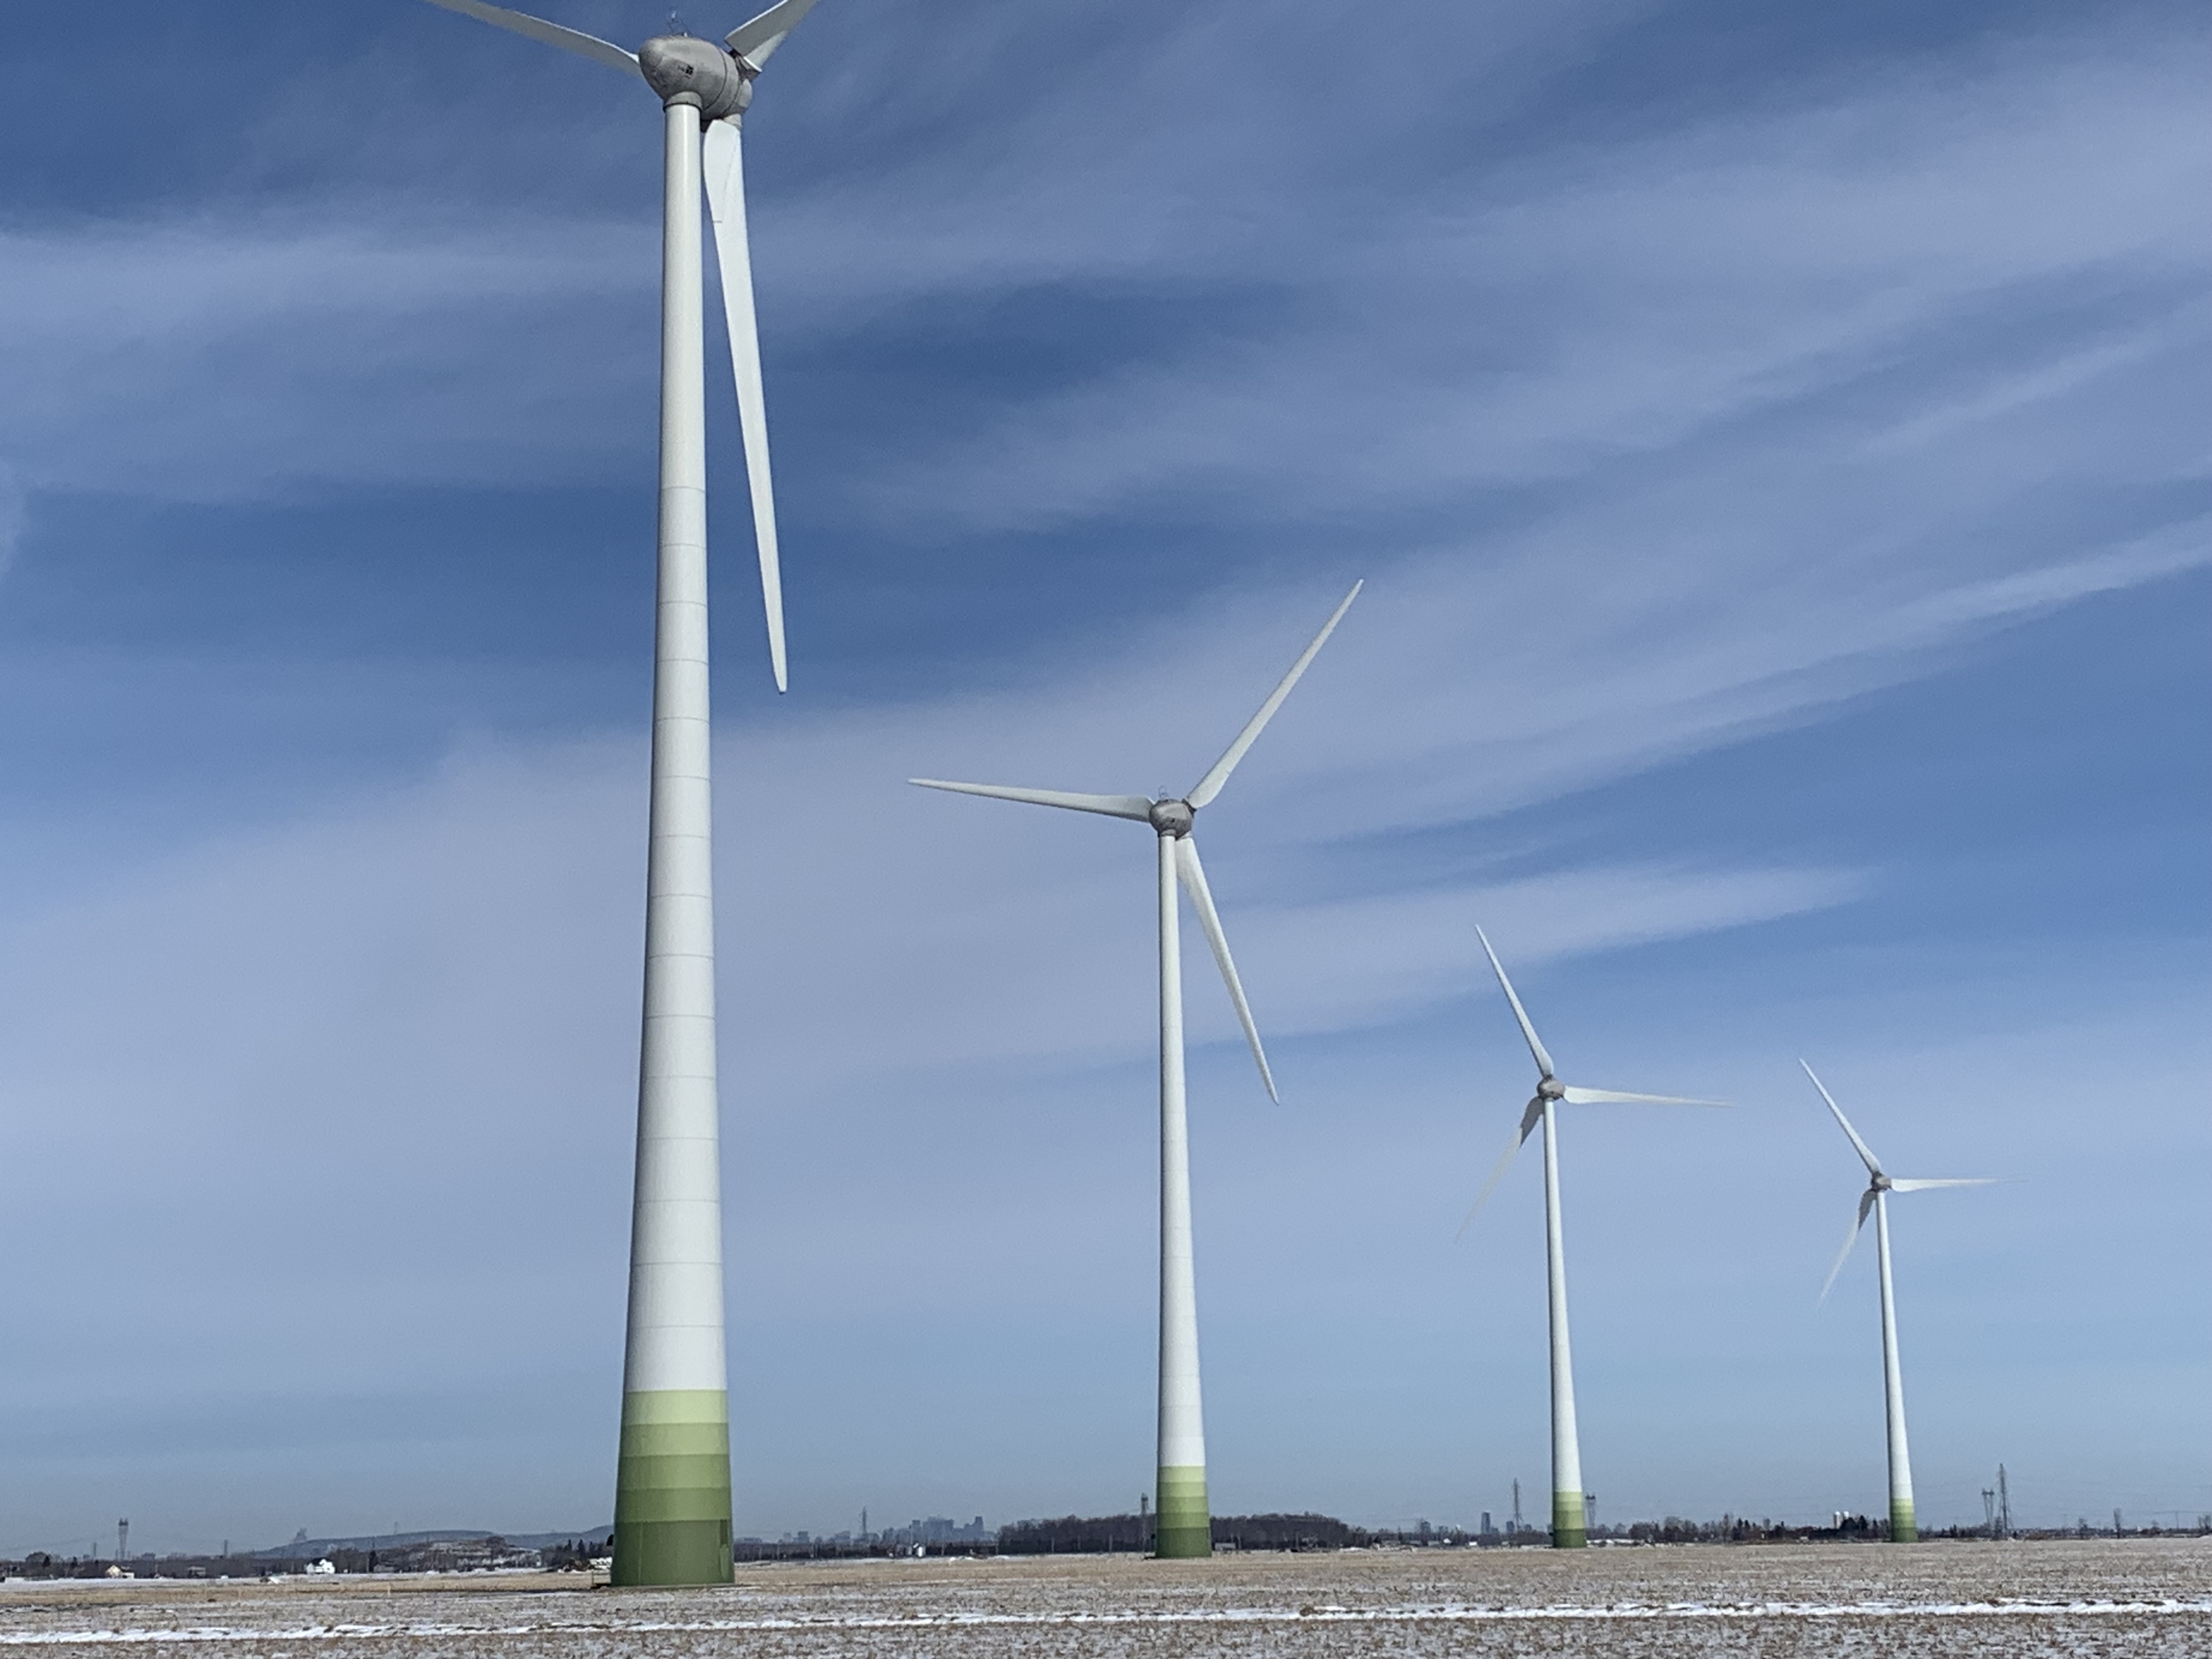 Mohawk Council of Kahnawake to benefit from new wind farm